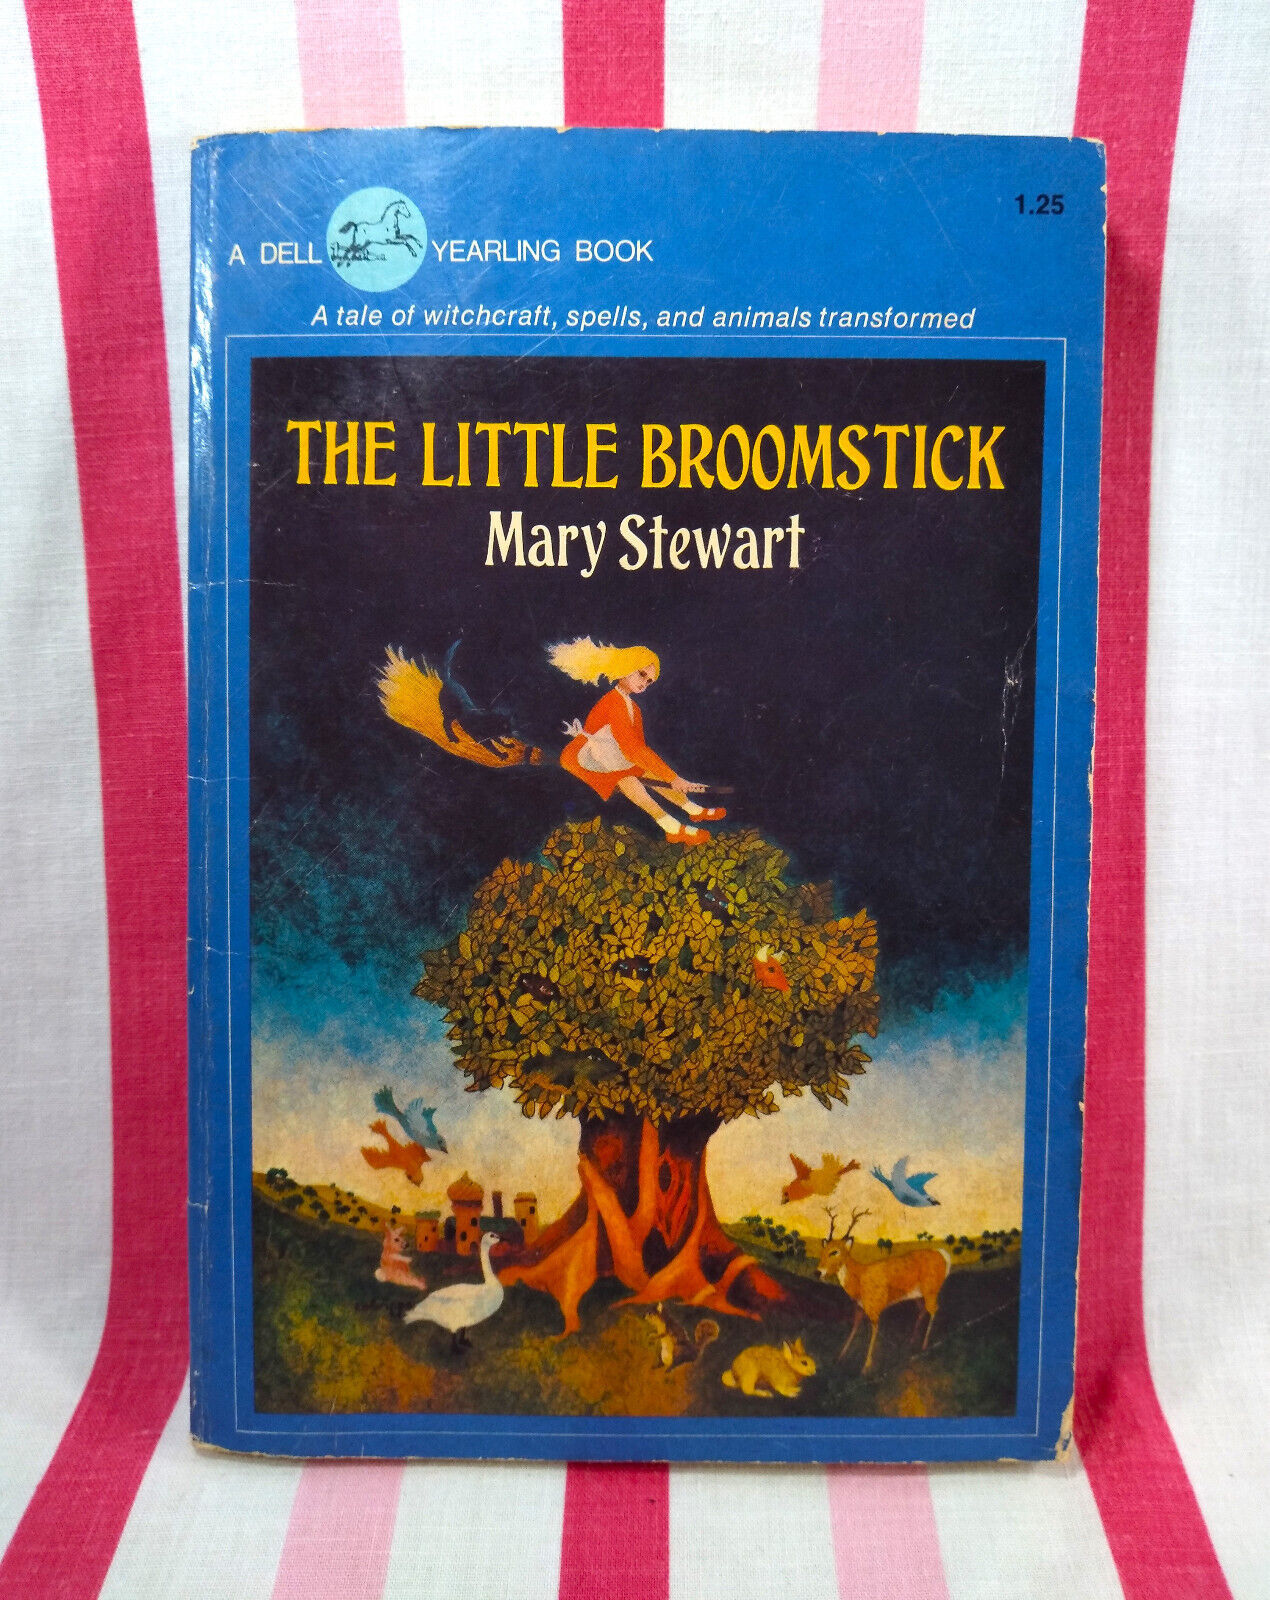 Primary image for The Little Broomstick by Mary Stewart Dell Yearling Paperback 1975